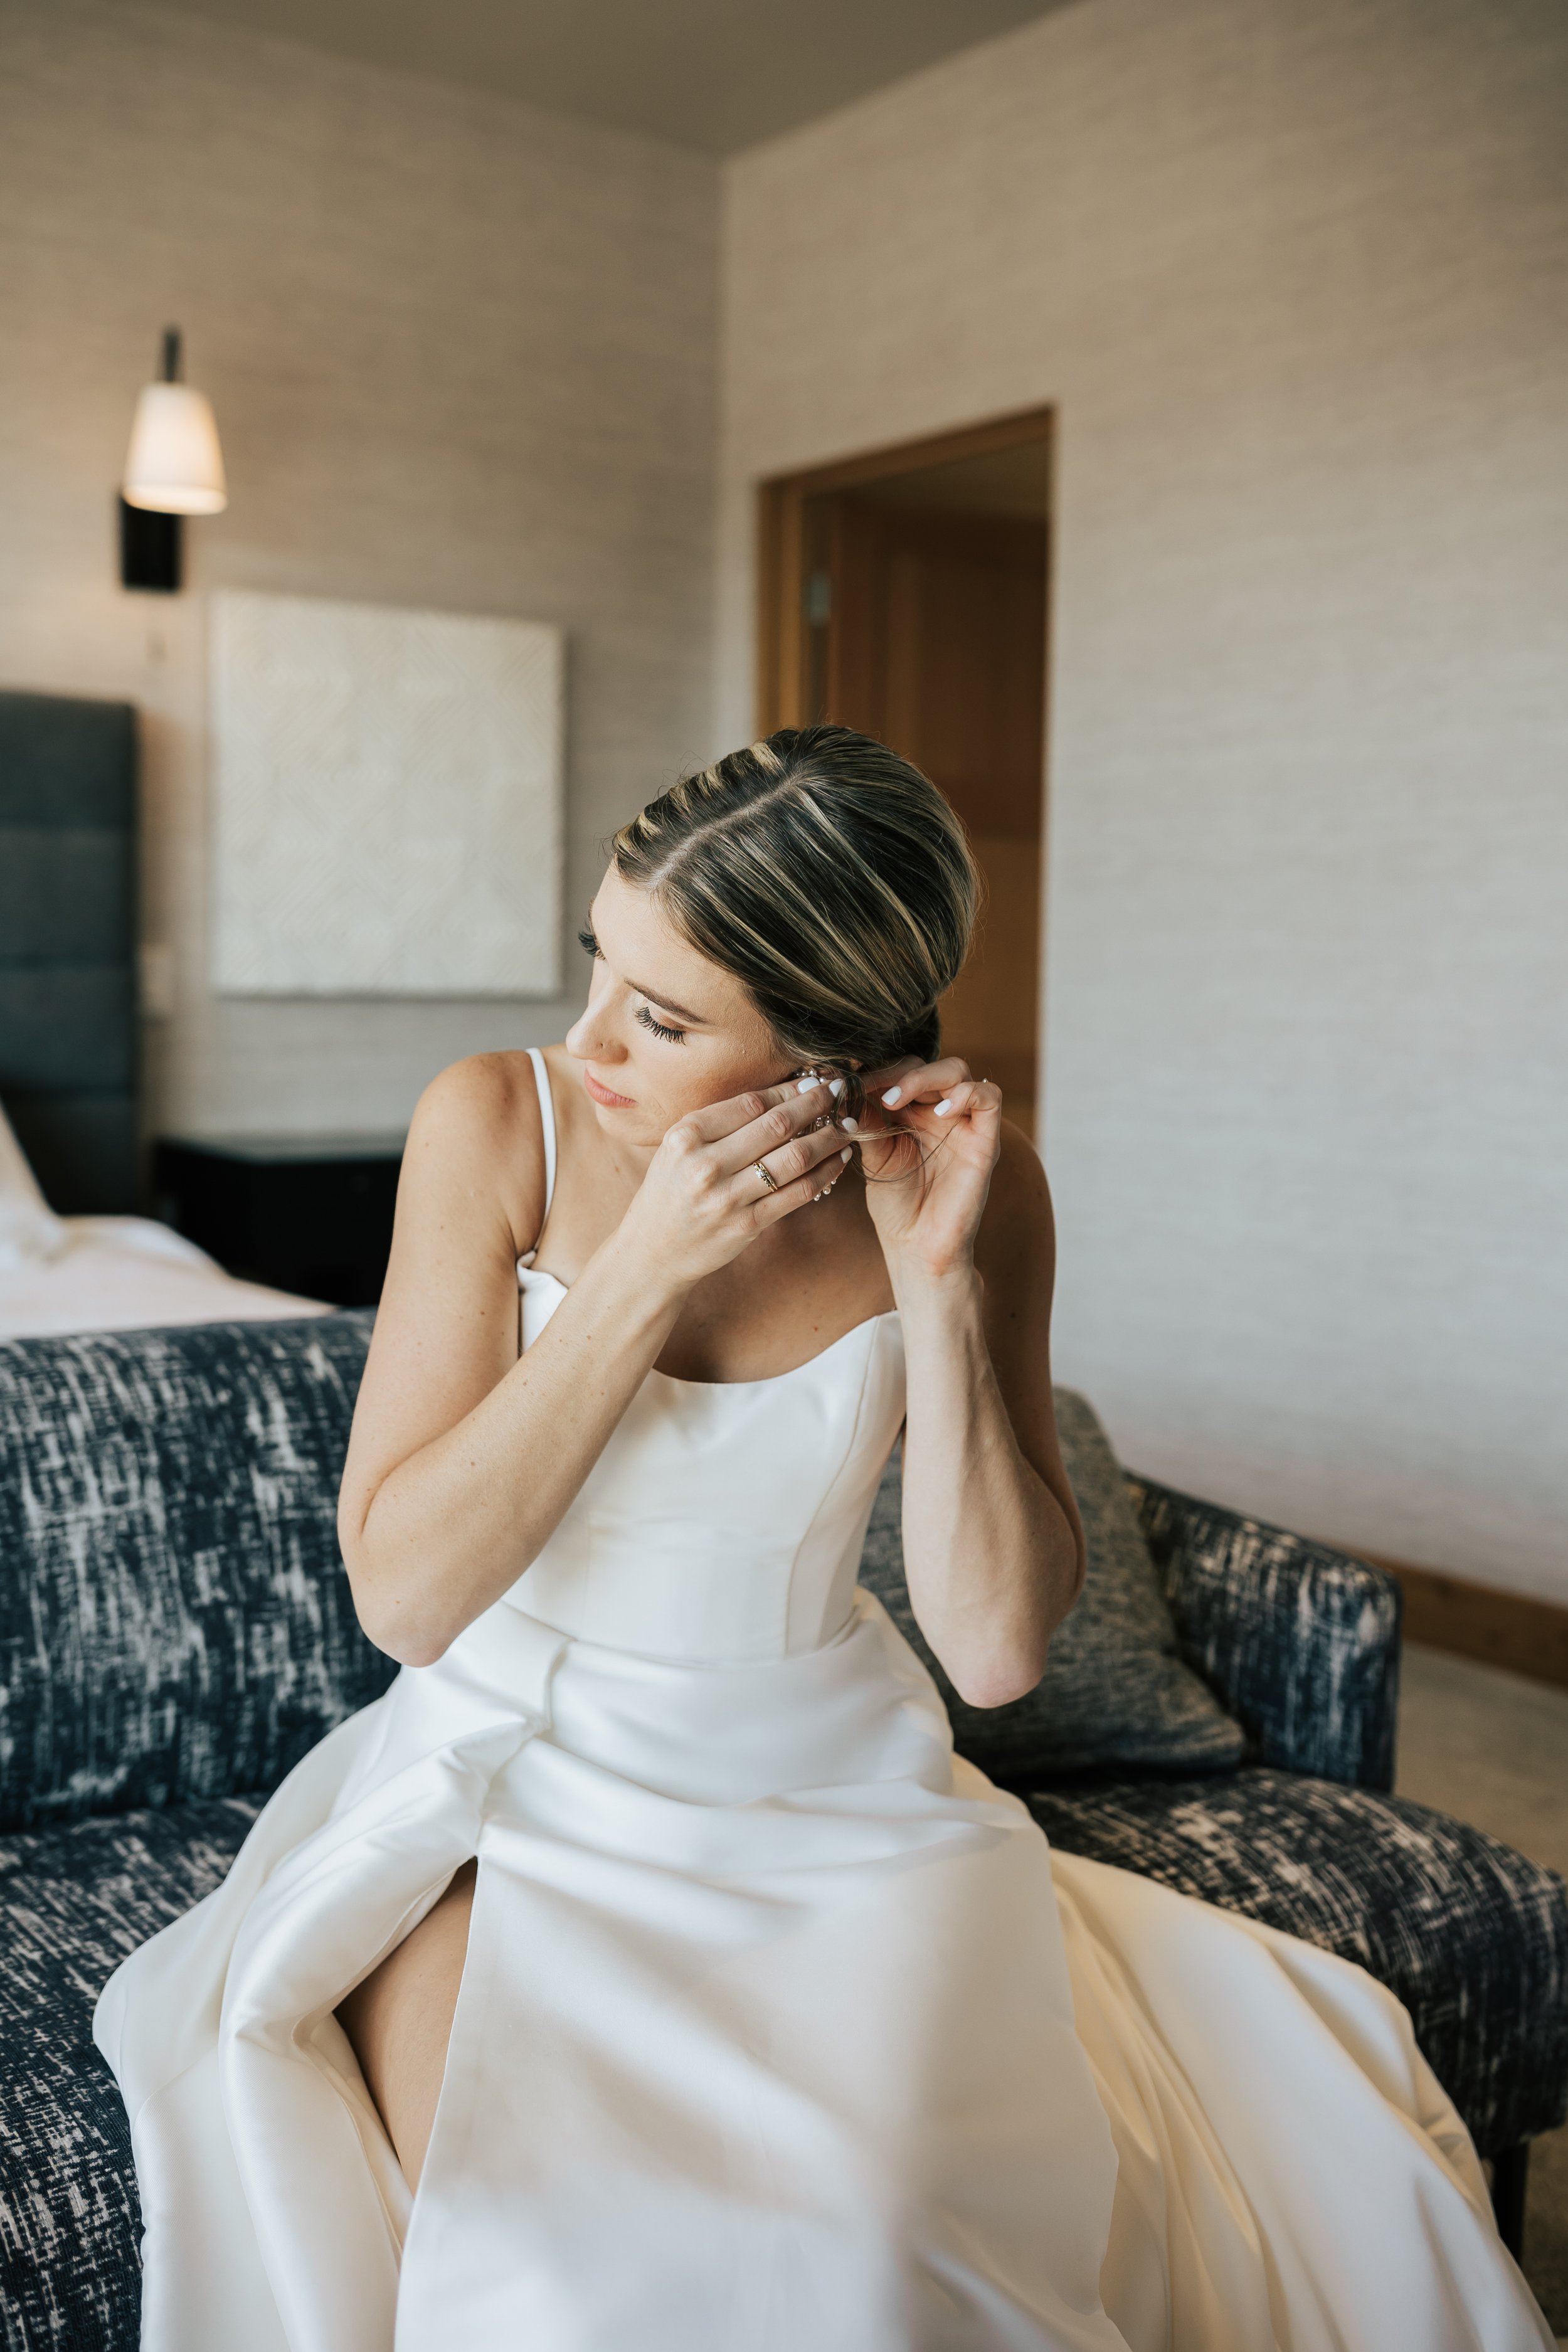  Getting ready photos. Bride gets ready in hotel room before wedding. Bride putting on her earrings before ceremony. #montanawedding #utahwedding #gettingreadyphotos 